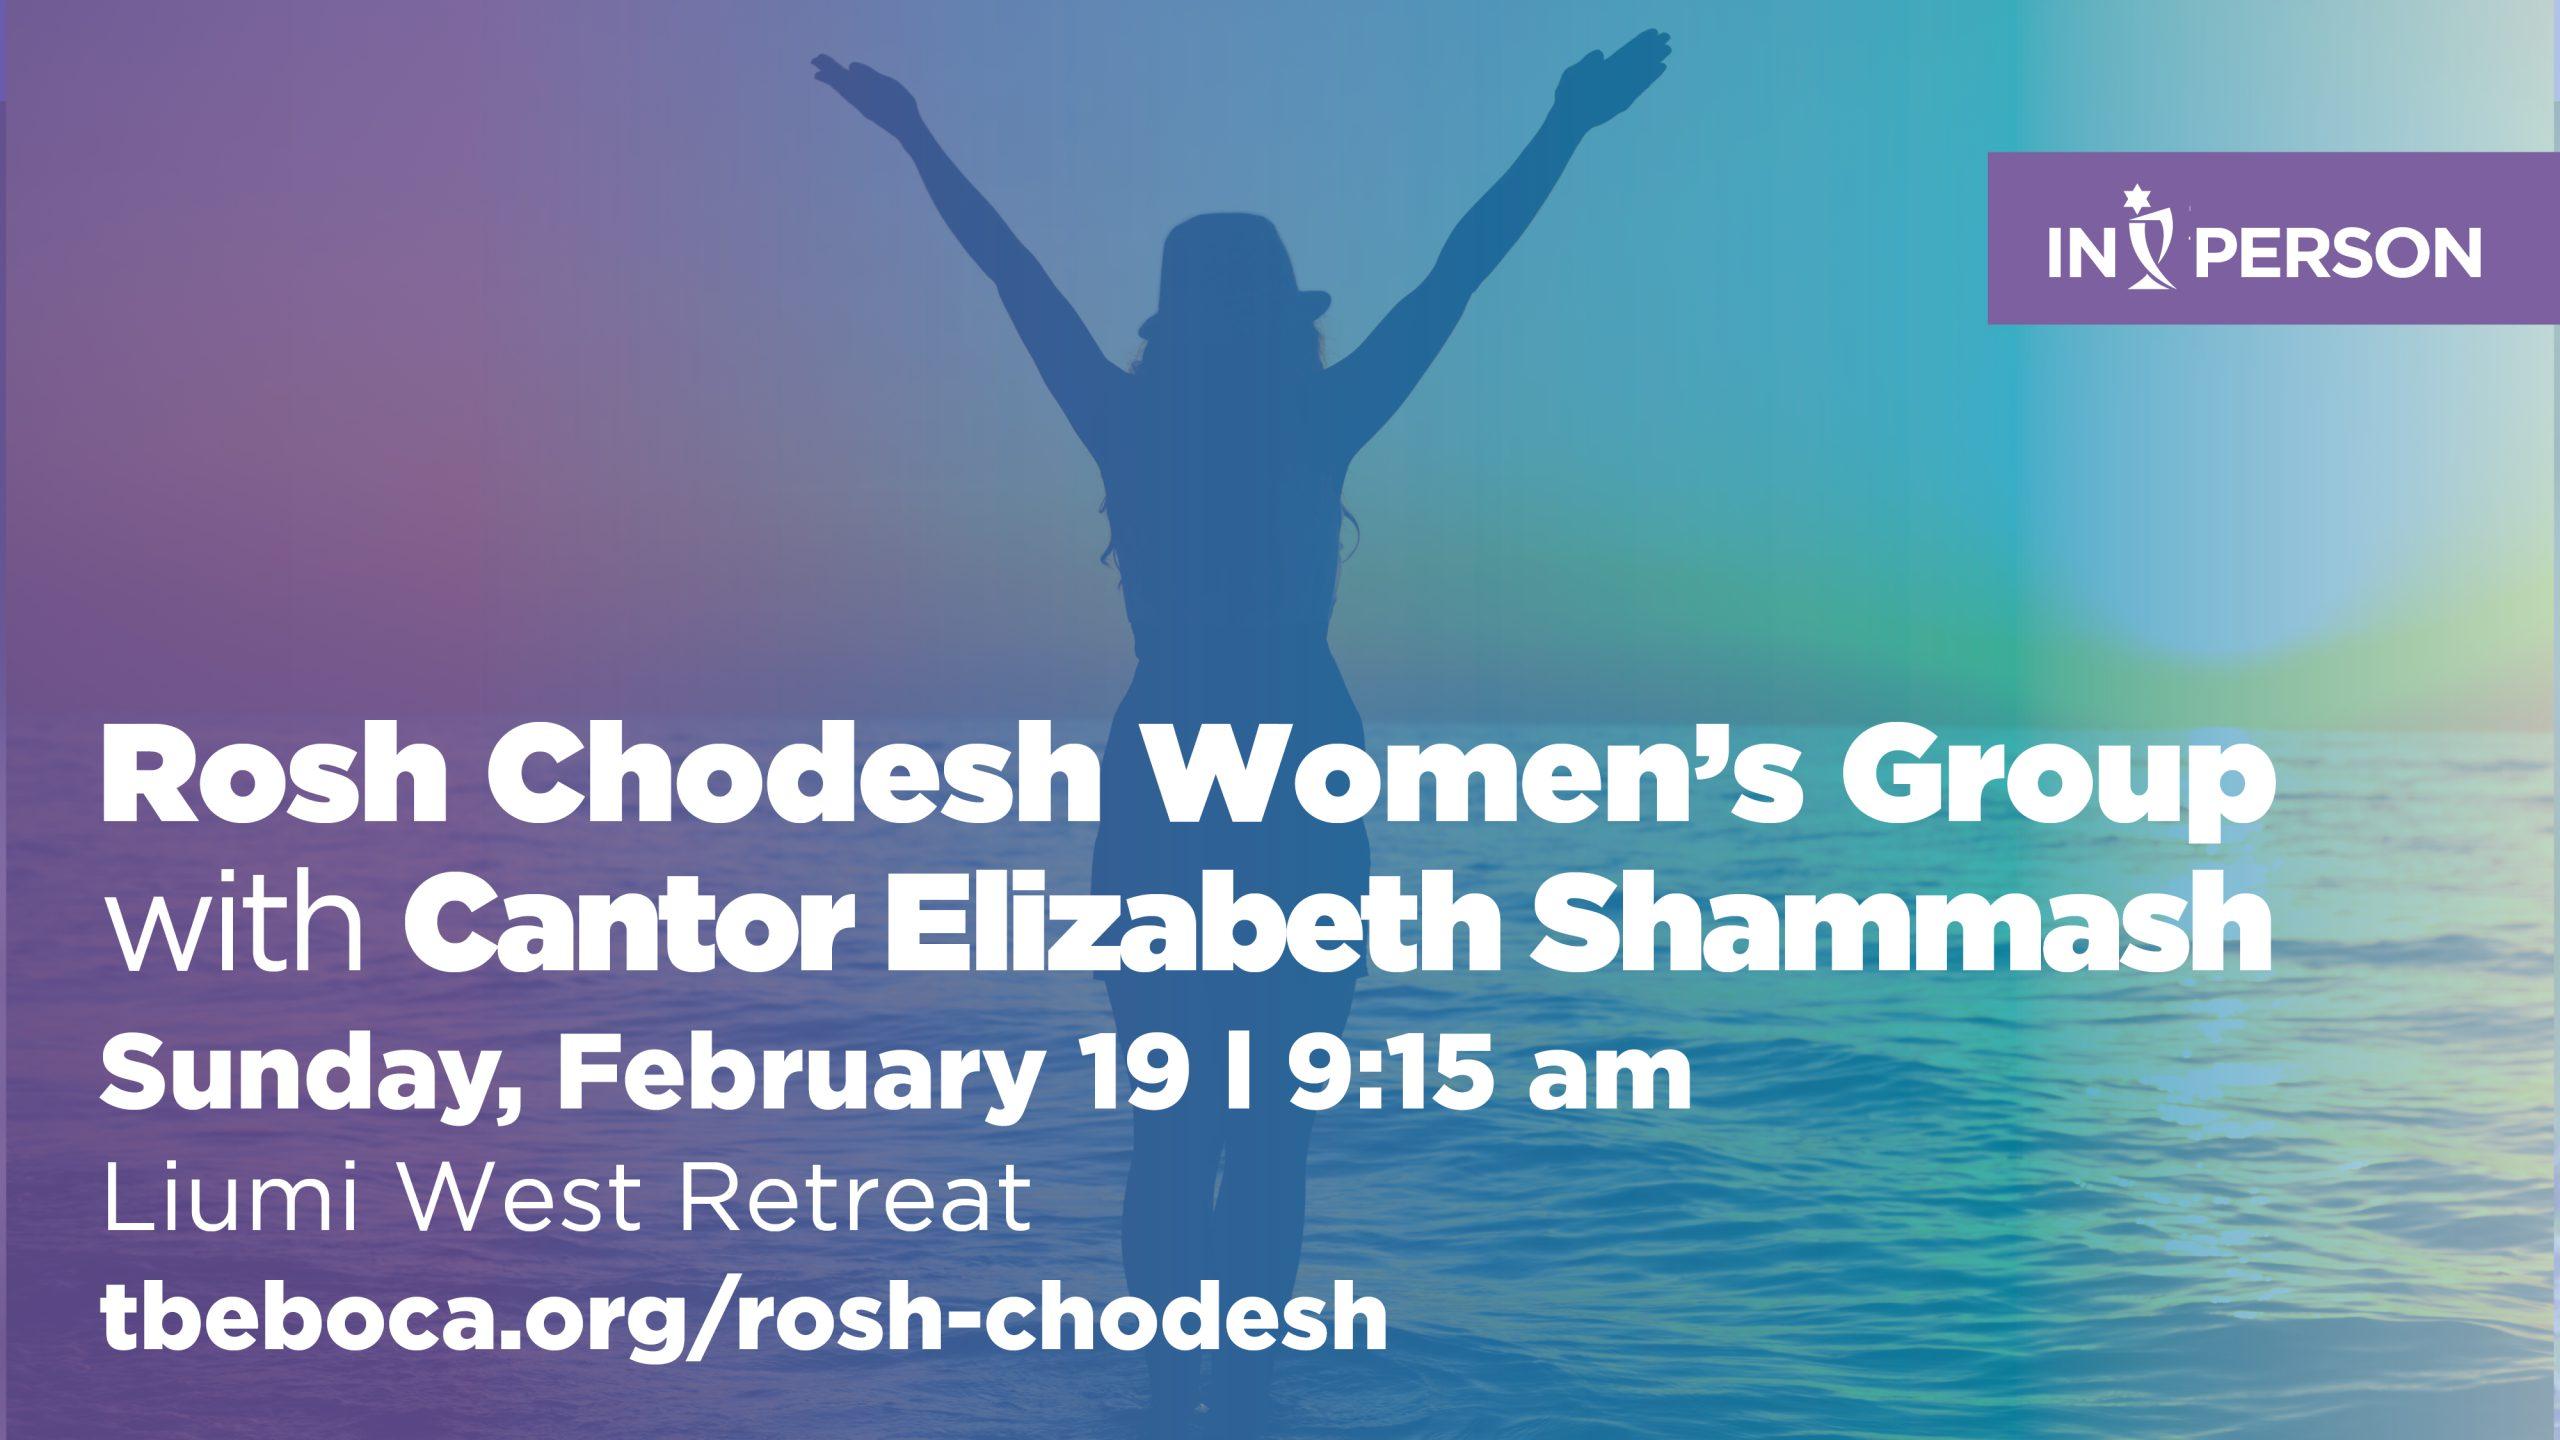 Rosh Chodesh Women's Group for Early Learning Center and Religious School Moms with Cantor Elizabeth Shammash, event graphic for Temple Beth El of Boca Raton